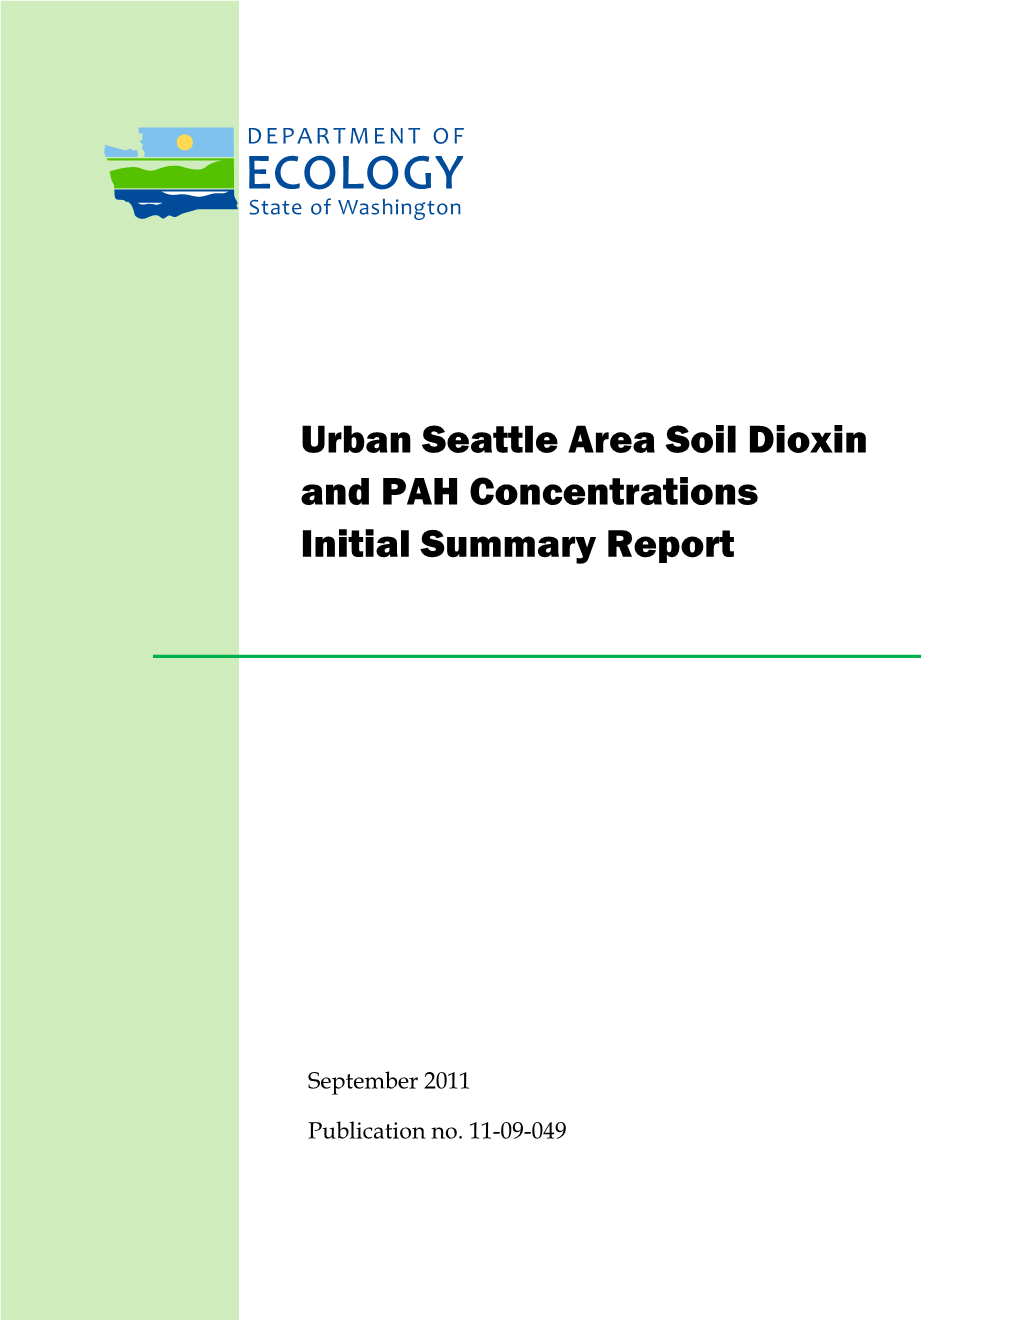 Urban Seattle Area Soil Dioxin and PAH Concentrations Initial Summary Report